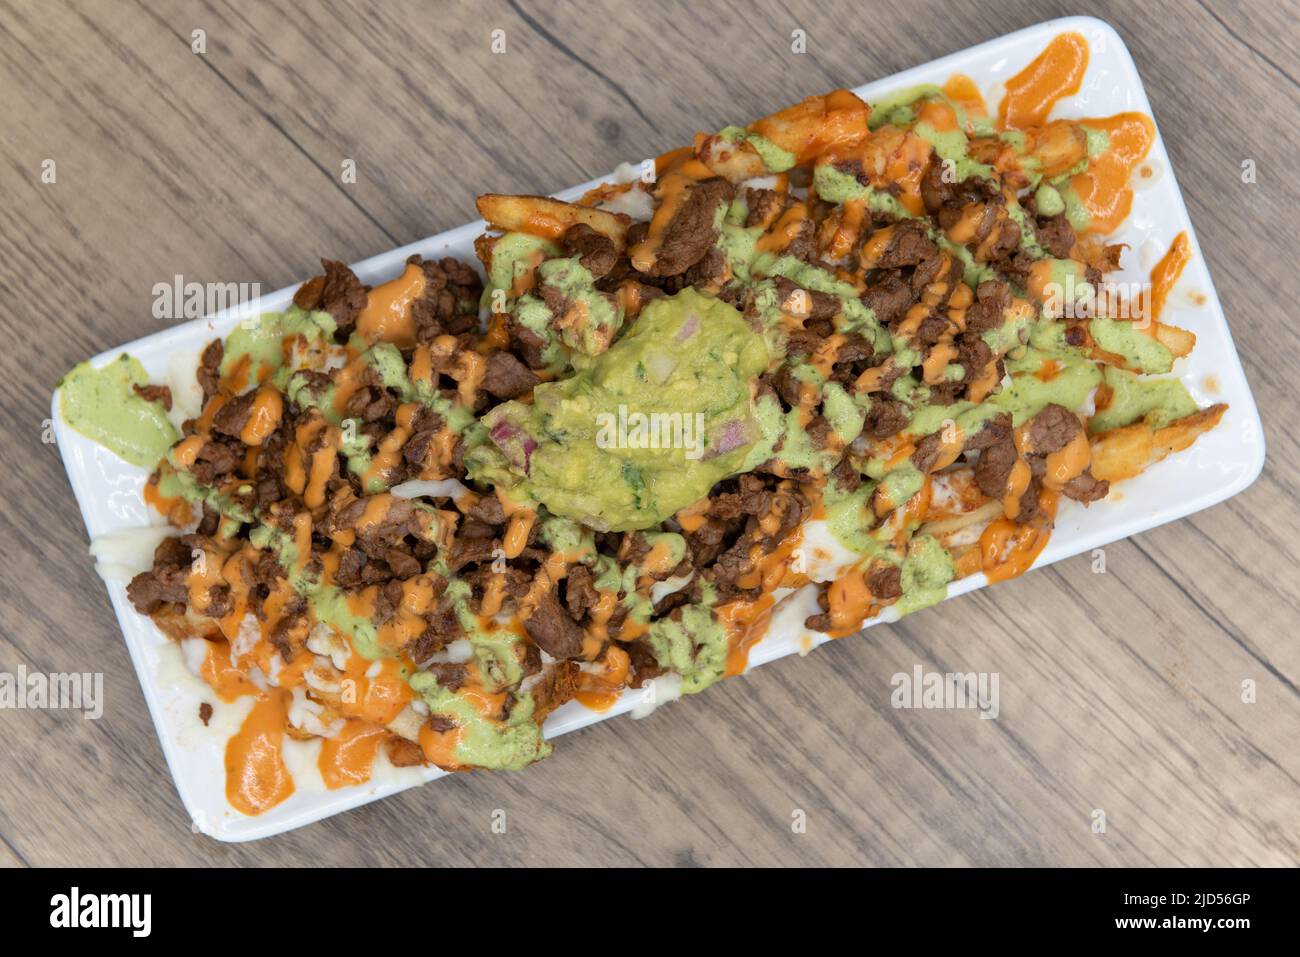 Overhead view of appetizing carne asada steak french fries for a tempting Mexican food delicacy. Stock Photo